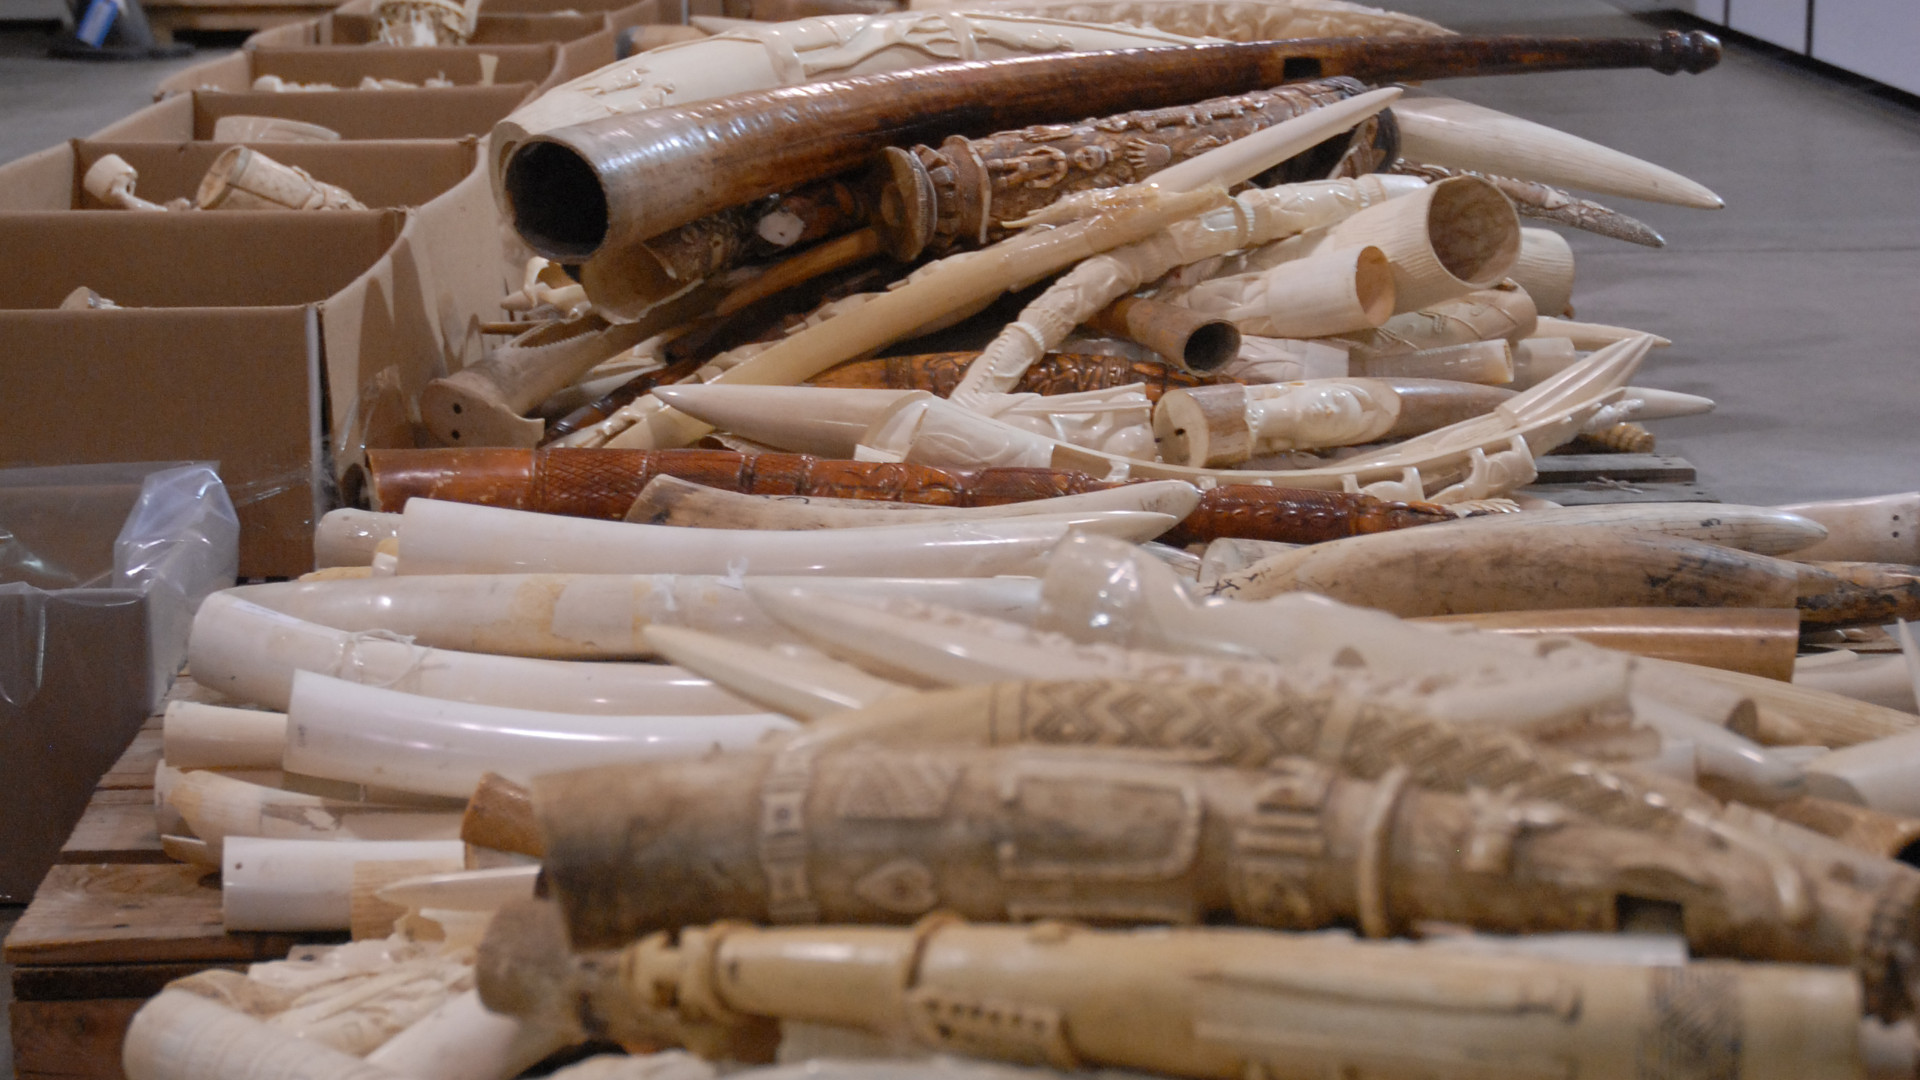 Illegal ivory